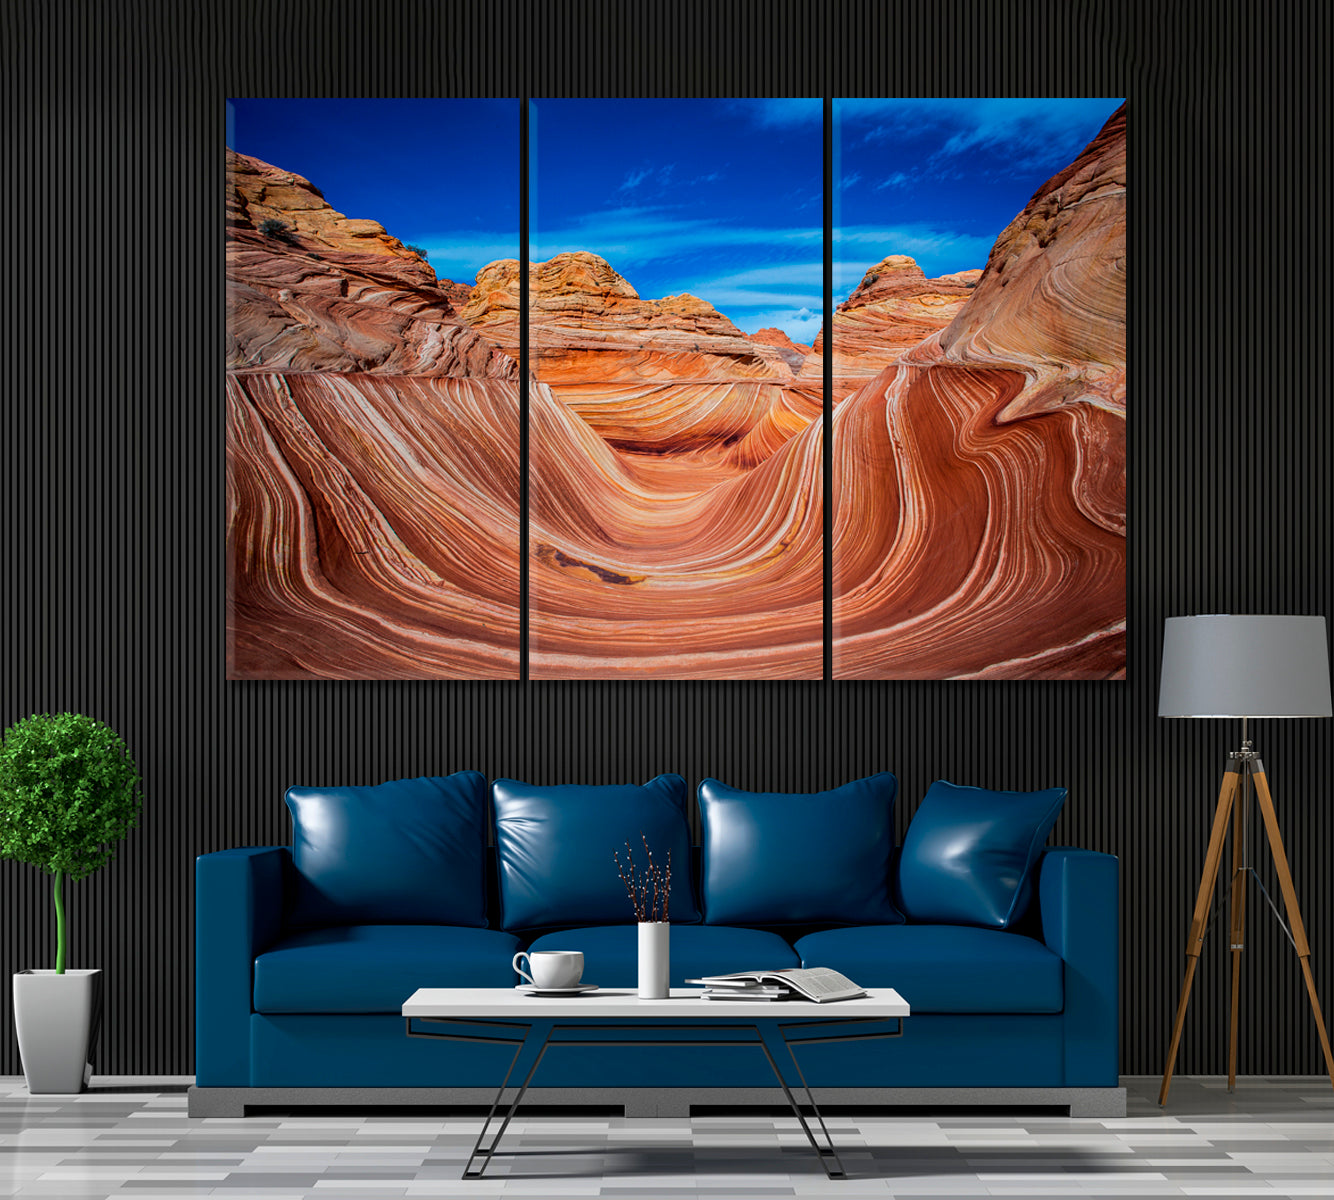 North Coyote Butte Arizona Canvas Print ArtLexy 3 Panels 36"x24" inches 